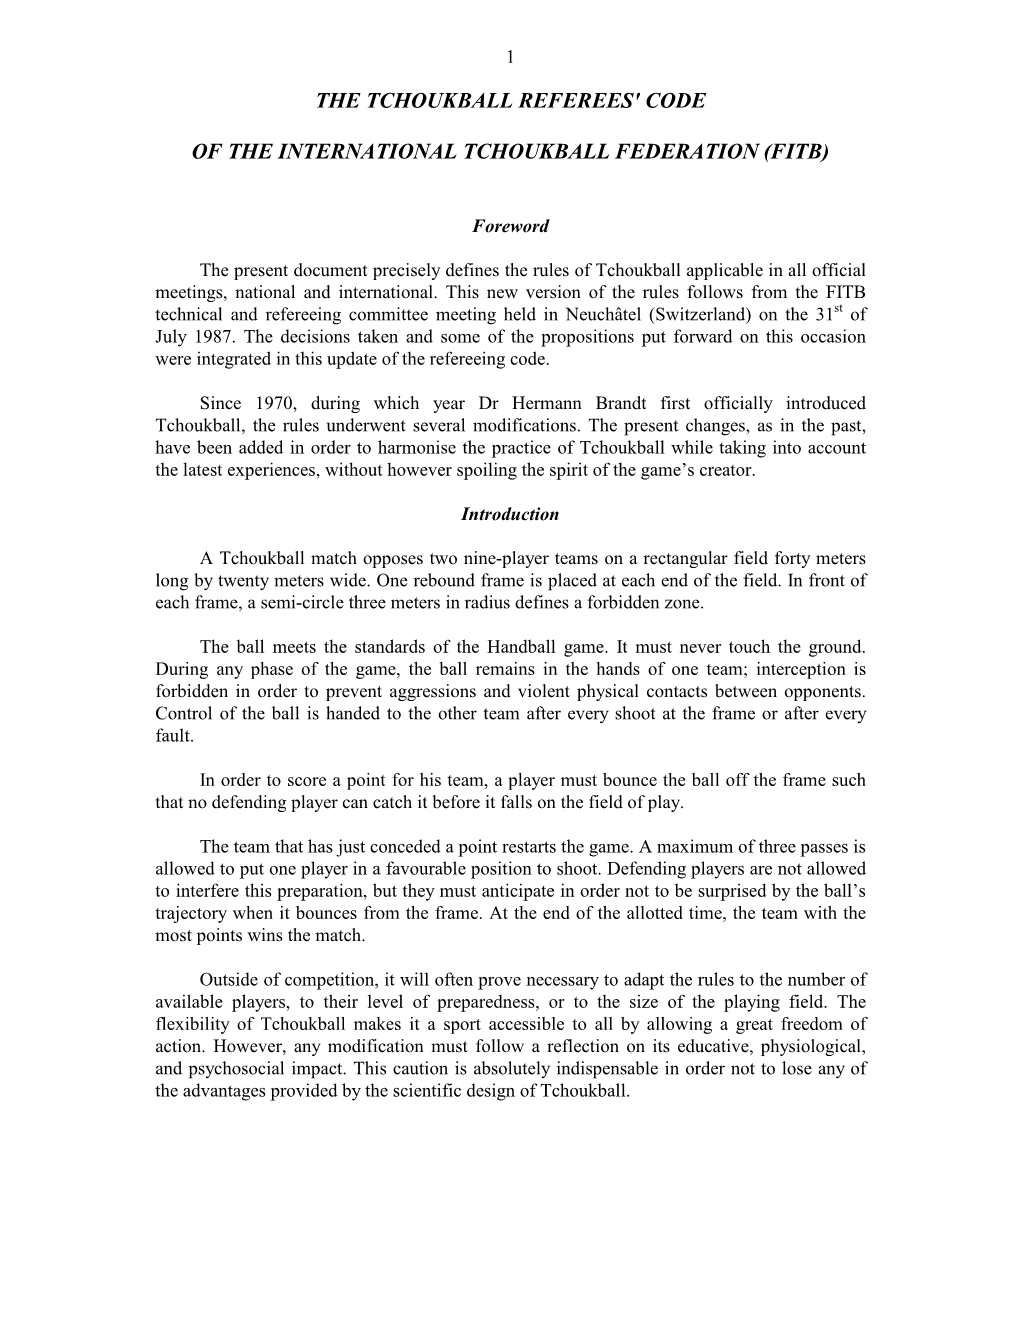 The Tchoukball Referees' Code of the International Tchoukball Federation (Fitb)